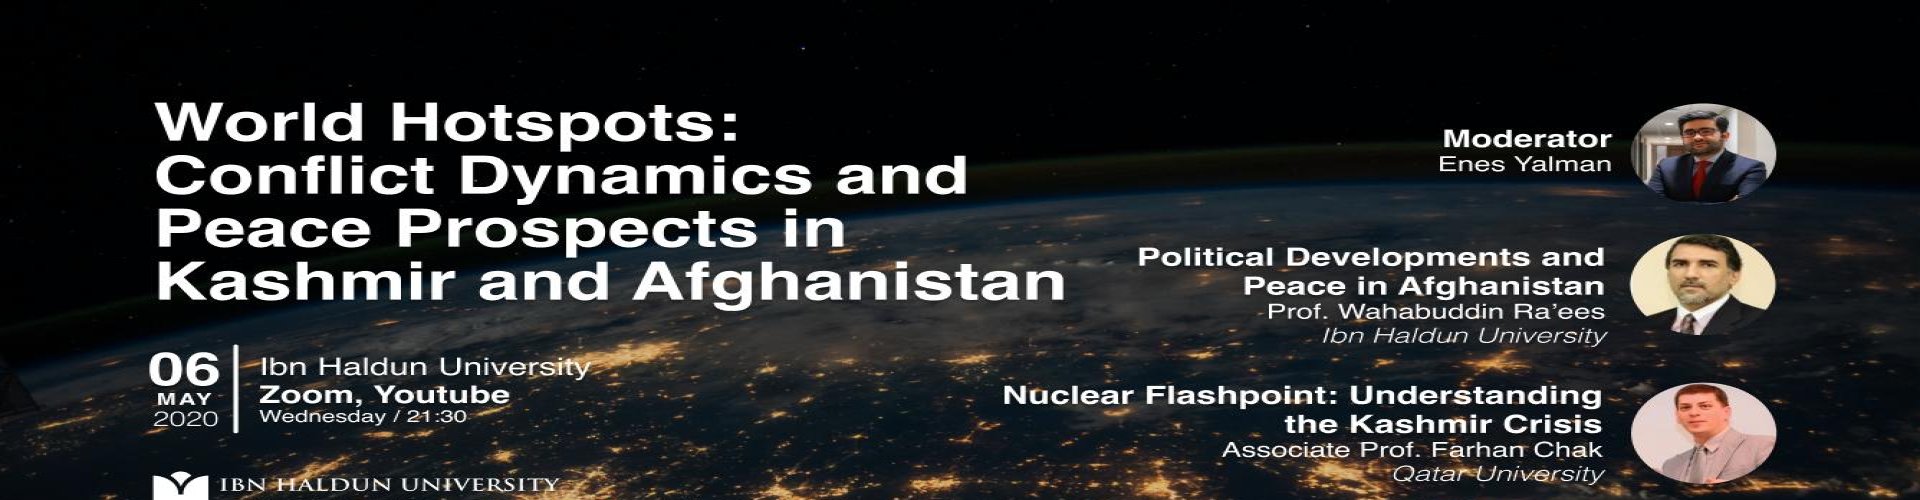 World Hotspots: Conflict Dynamis and Peace Prospects in Kashmir and Afganistan